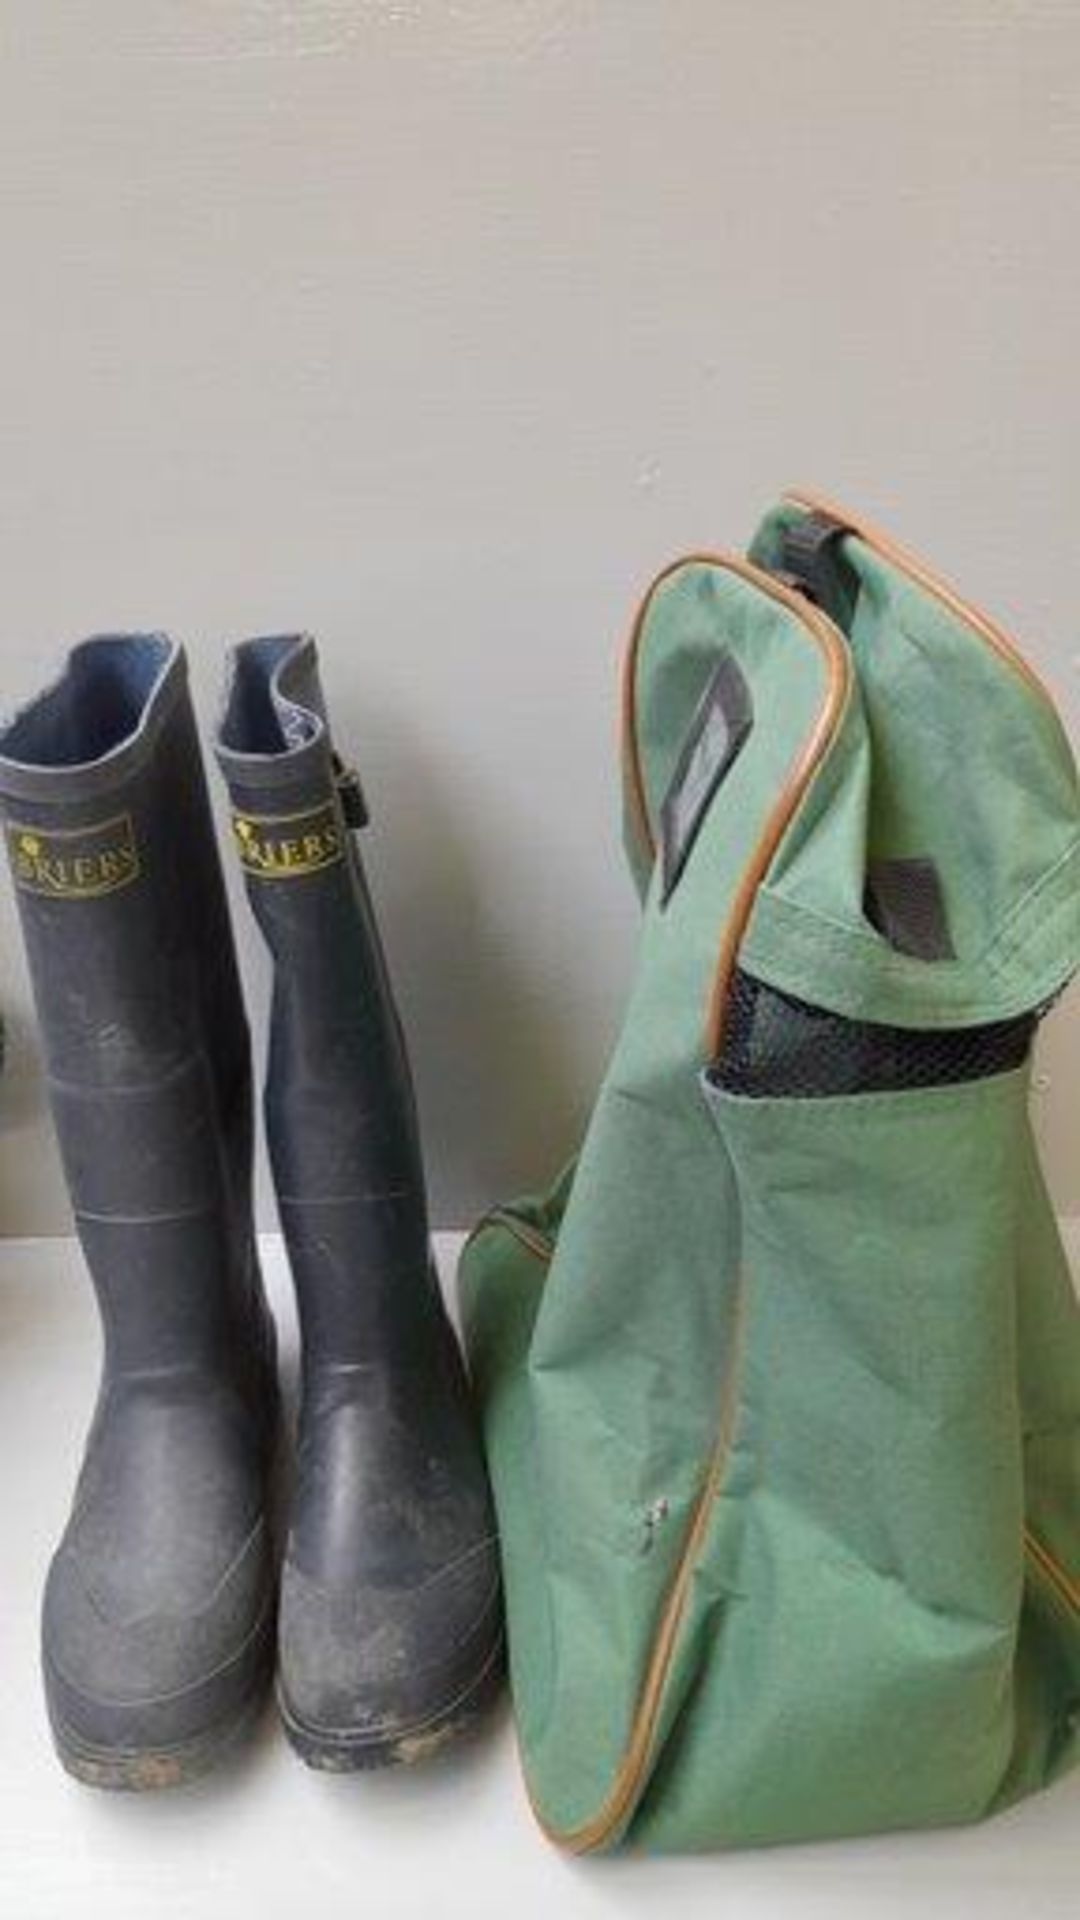 Heat Lamp, A Pair Of Briers Wellingtons In Canvas Bag Size 6 & A Waterproof Jacket